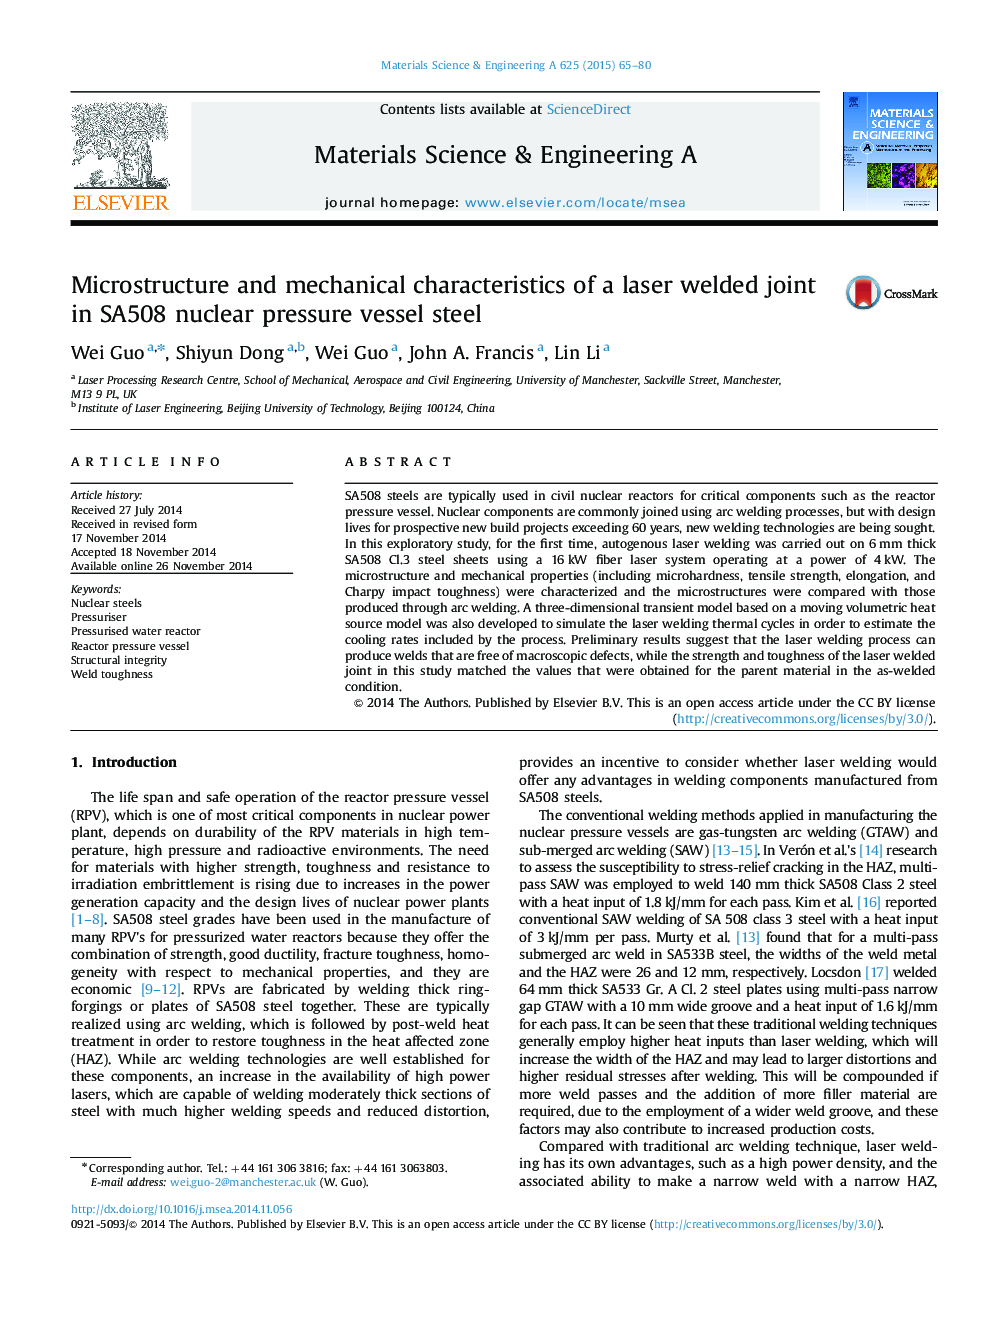 Microstructure and mechanical characteristics of a laser welded joint in SA508 nuclear pressure vessel steel